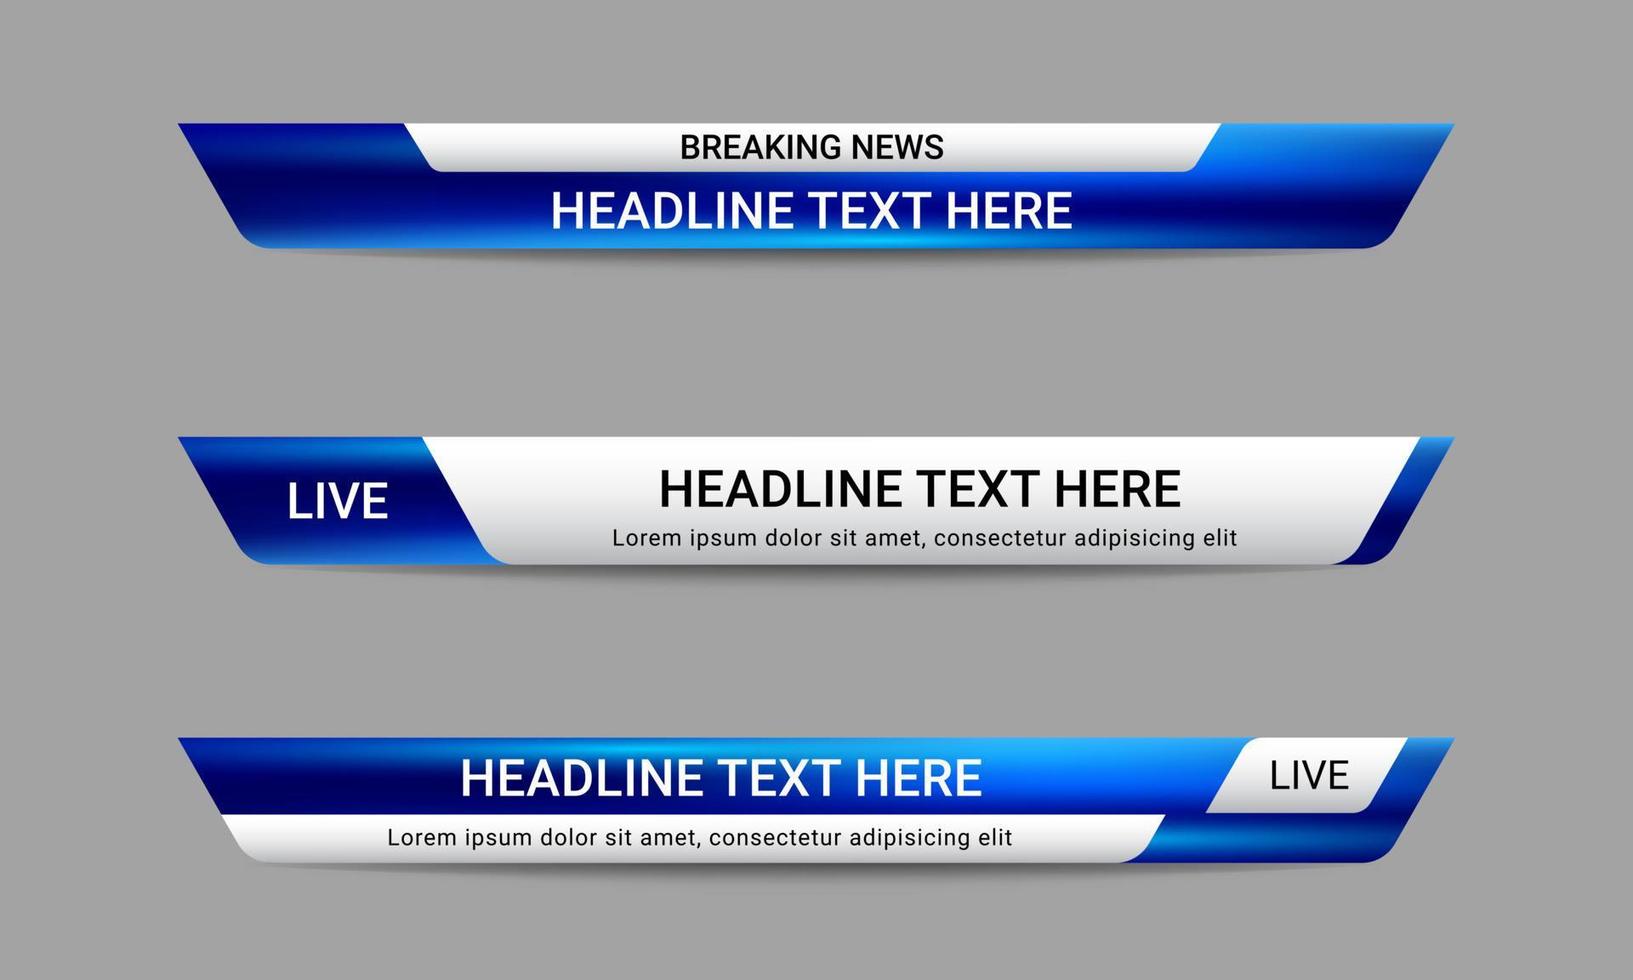 Newscast lower third banner vector. Set of lower third bar templates for breaking news, sports news on television, video and media online vector